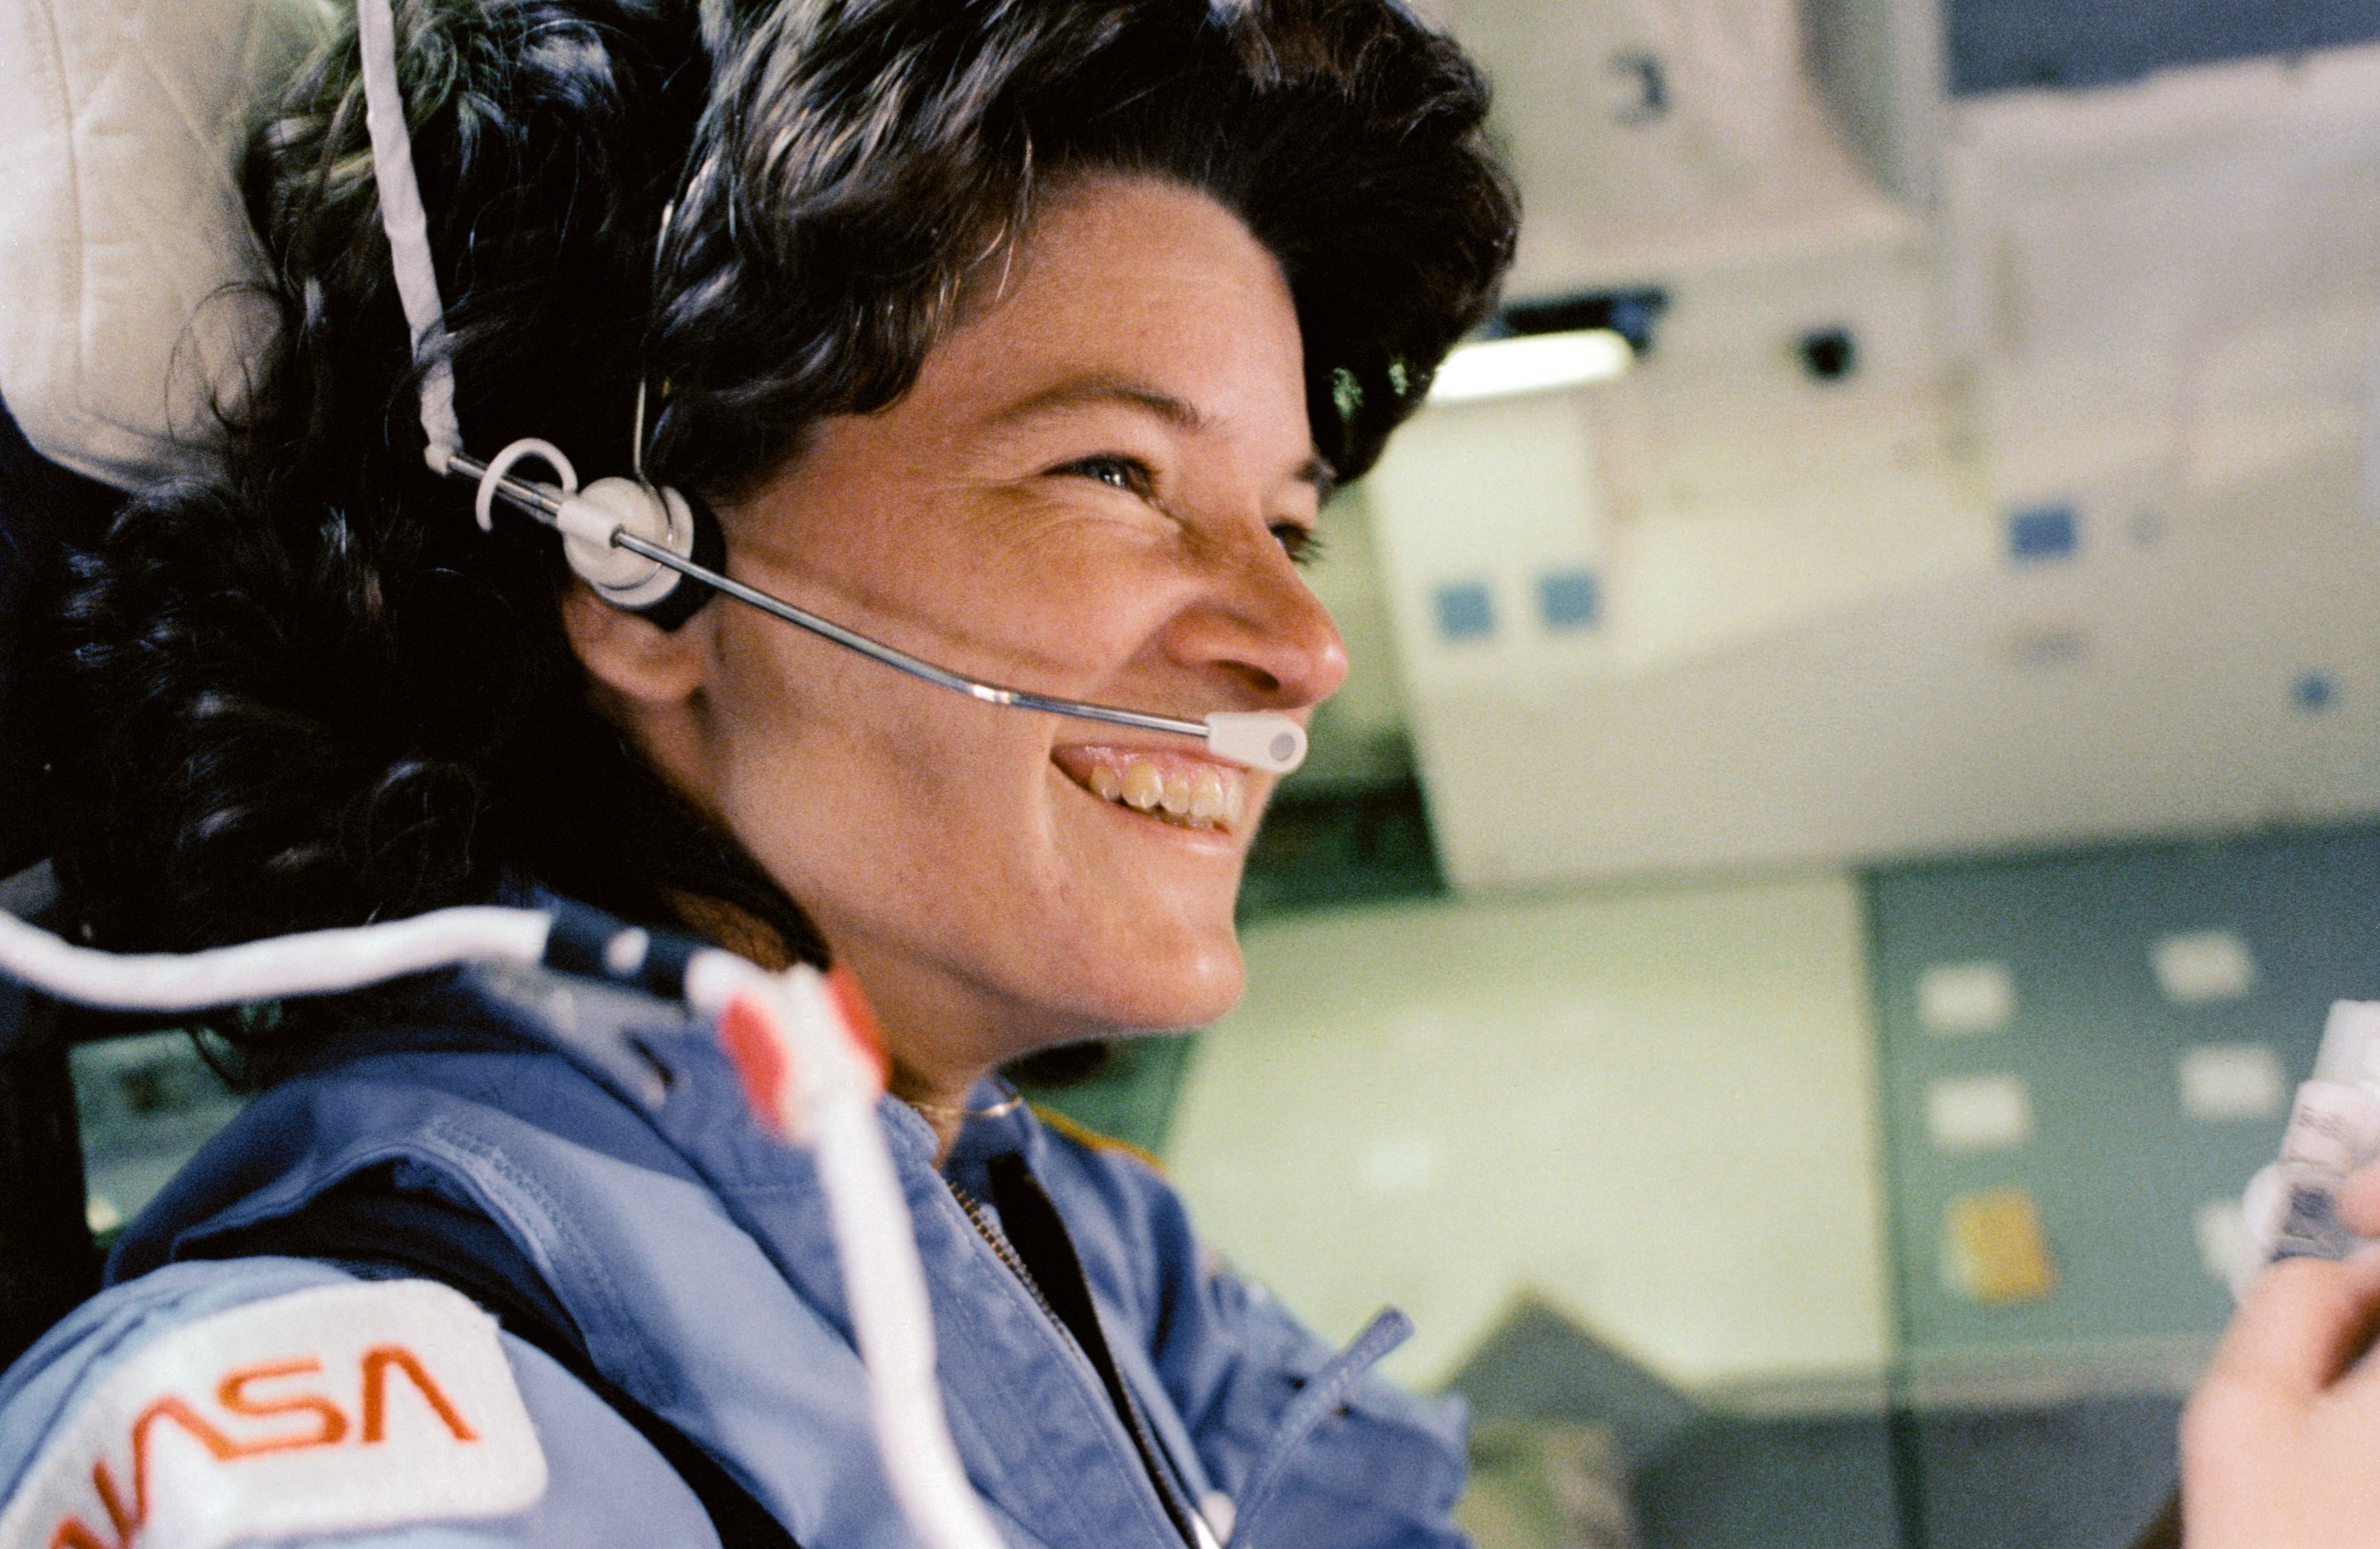 Tributes Mount As Sally Ride's 30th Anniversary In Space Approaches - Universe Today